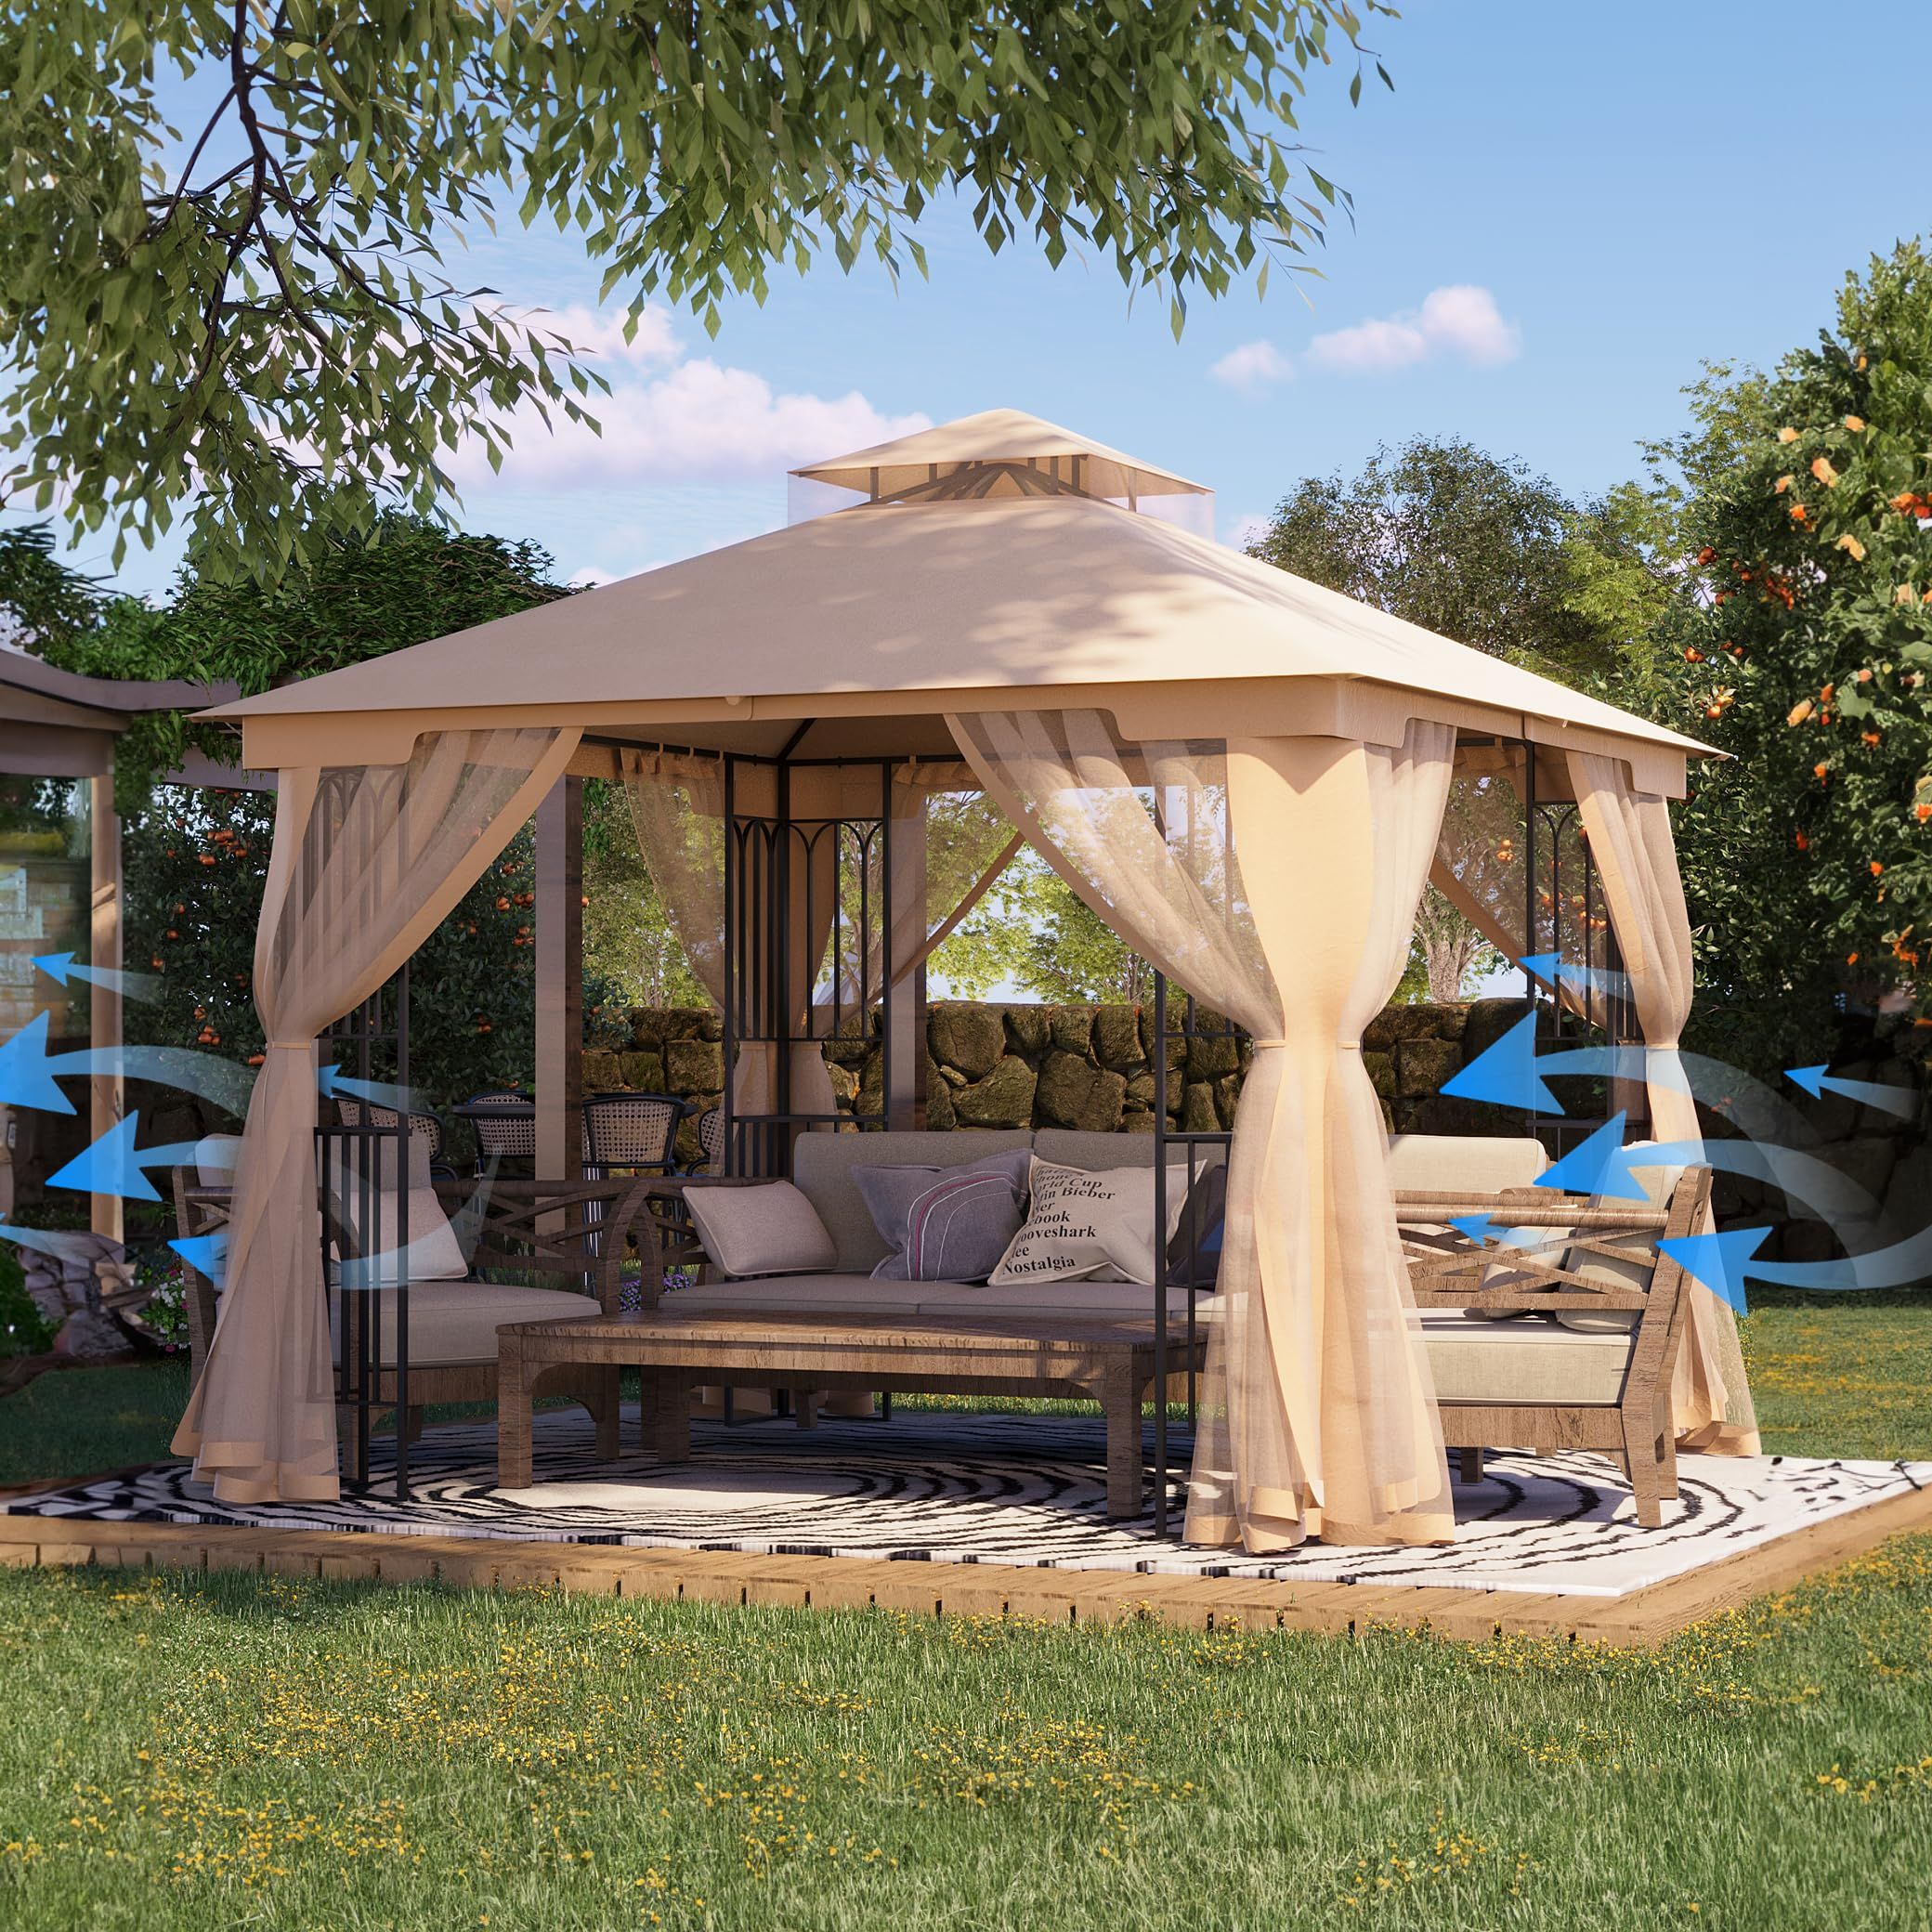 The Complete Guide to Choosing the Ideal Gazebo Canopy for Your Outdoor Space